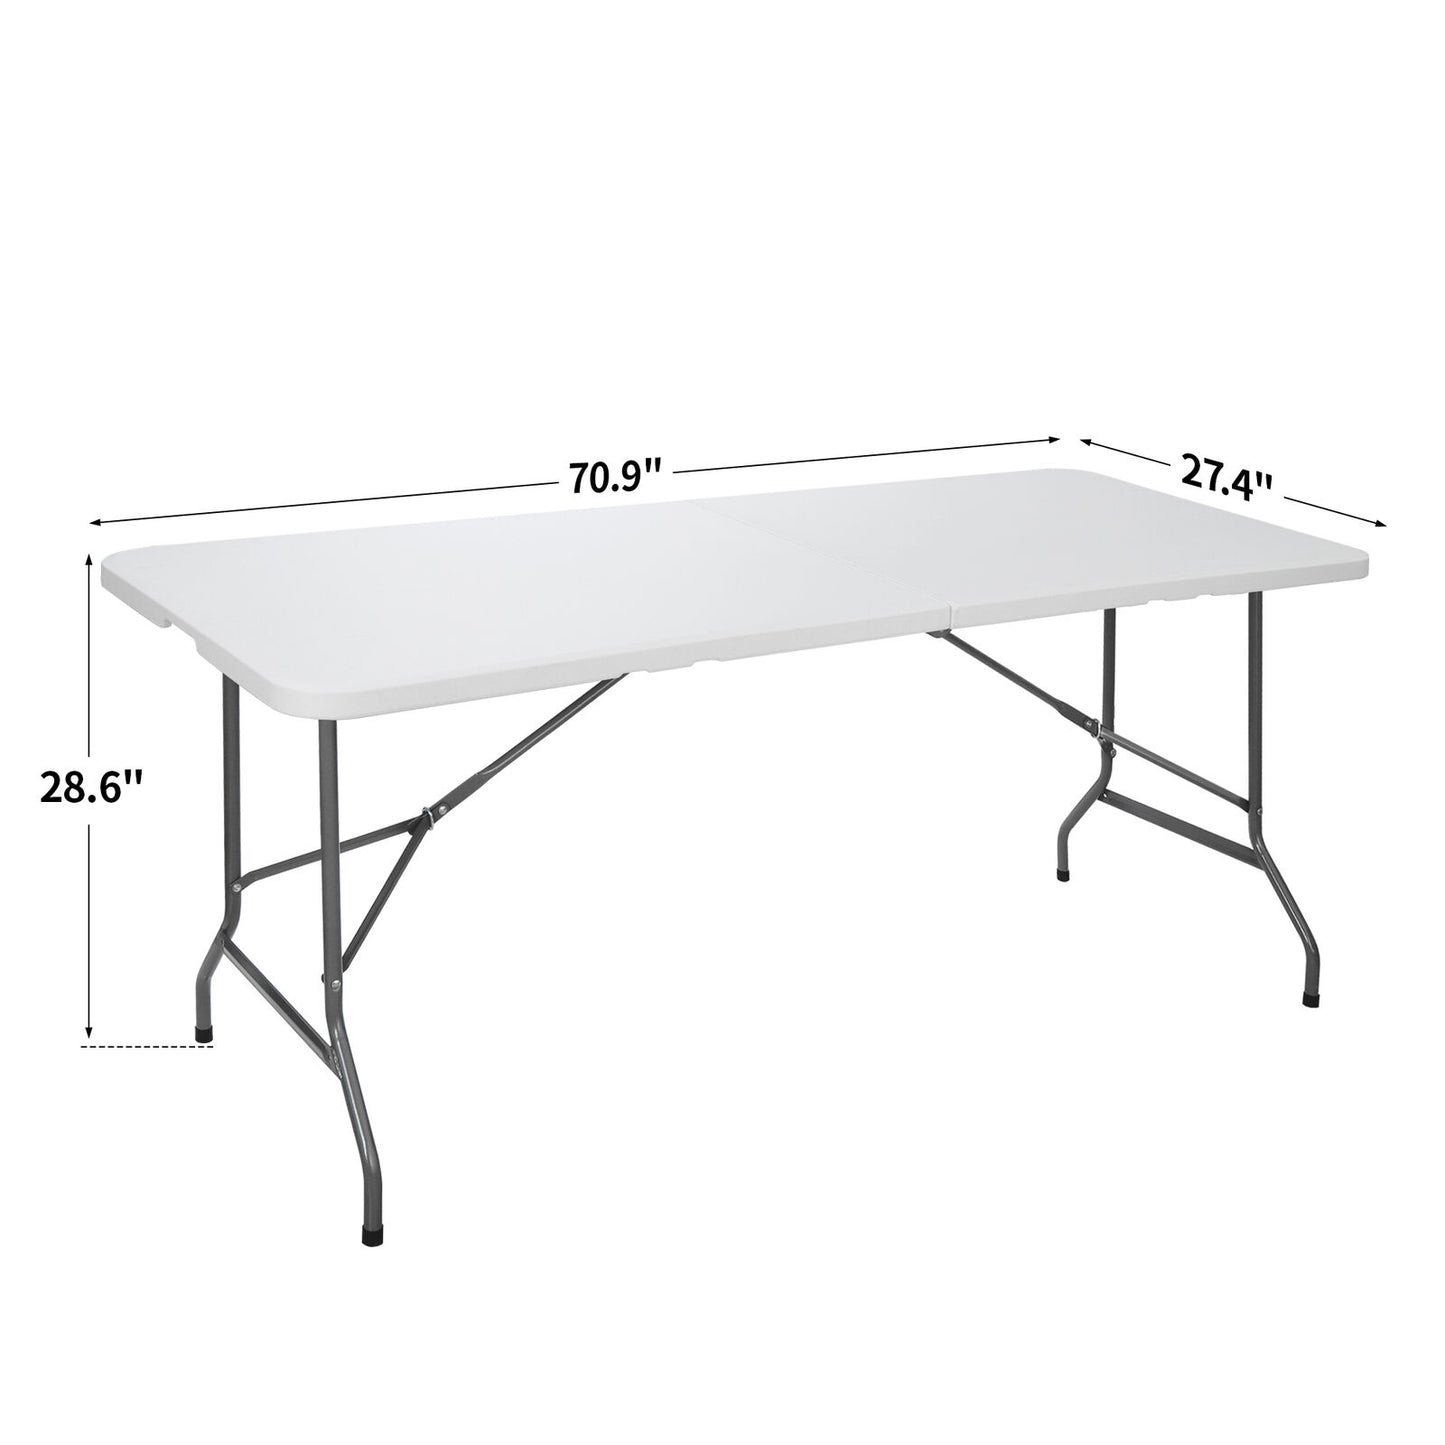 4X 6' Portable Folding Table Plastic Picnic Party Camp Dining White Indoor